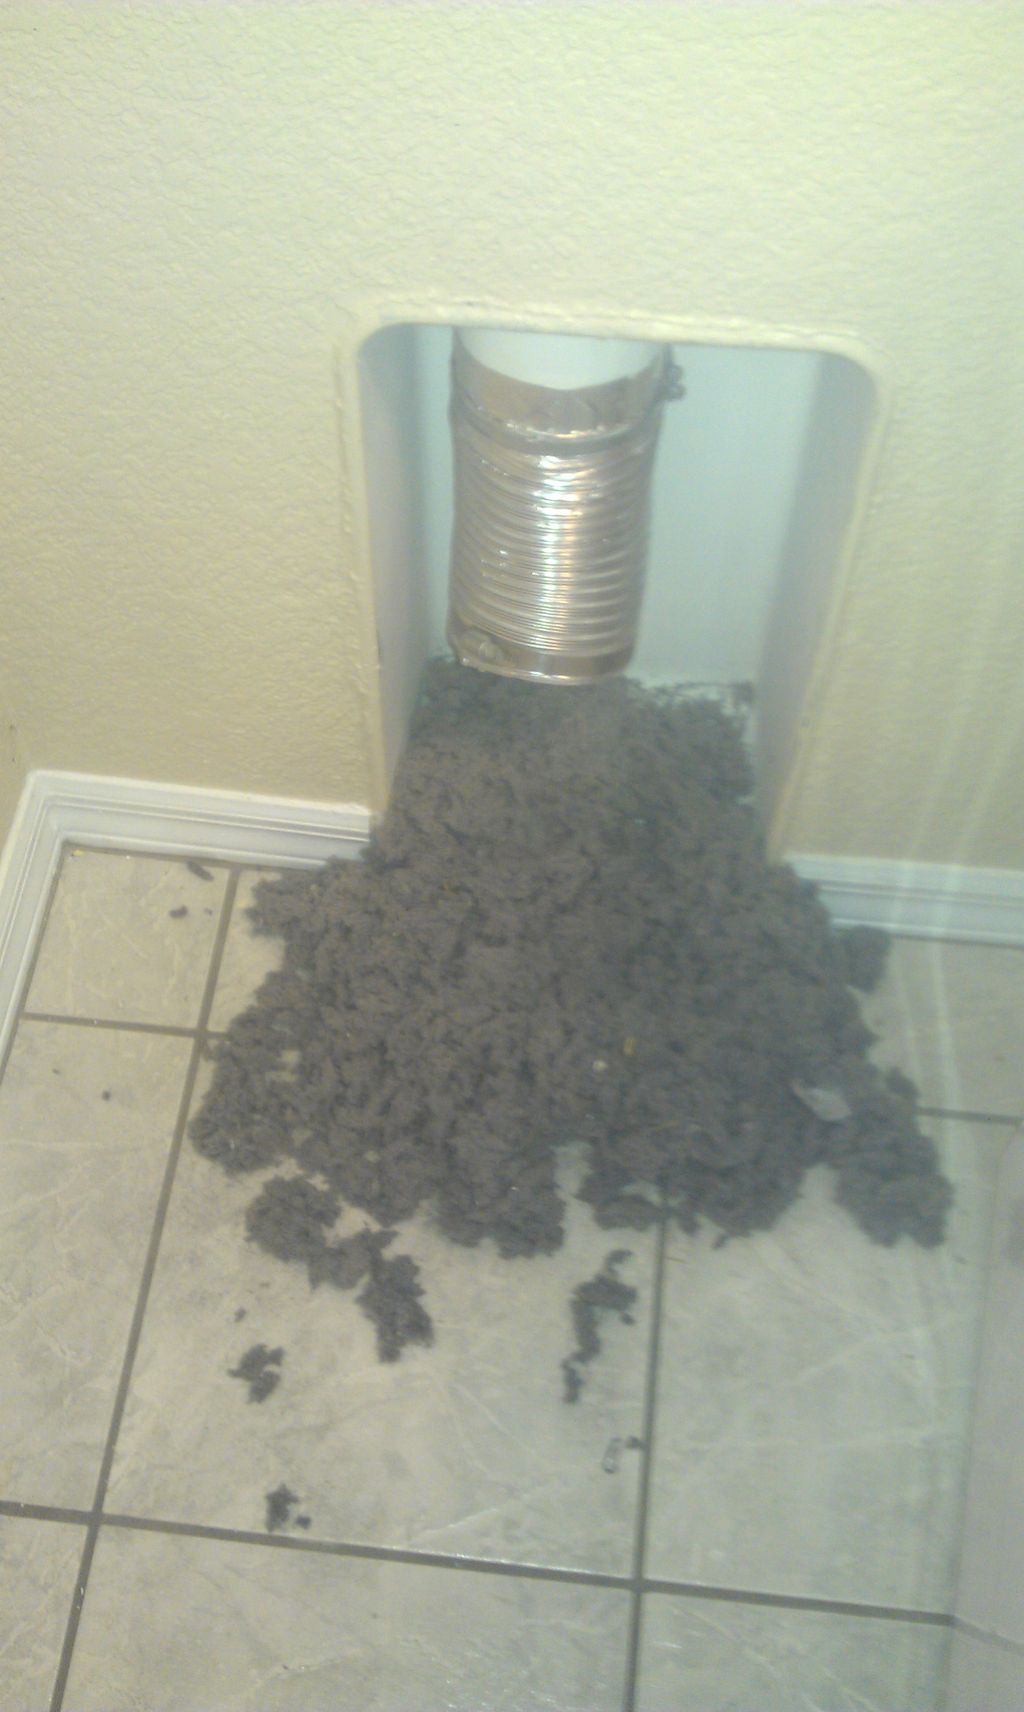 Air Fresh Dryer Vent And Duct Cleaning Inc.